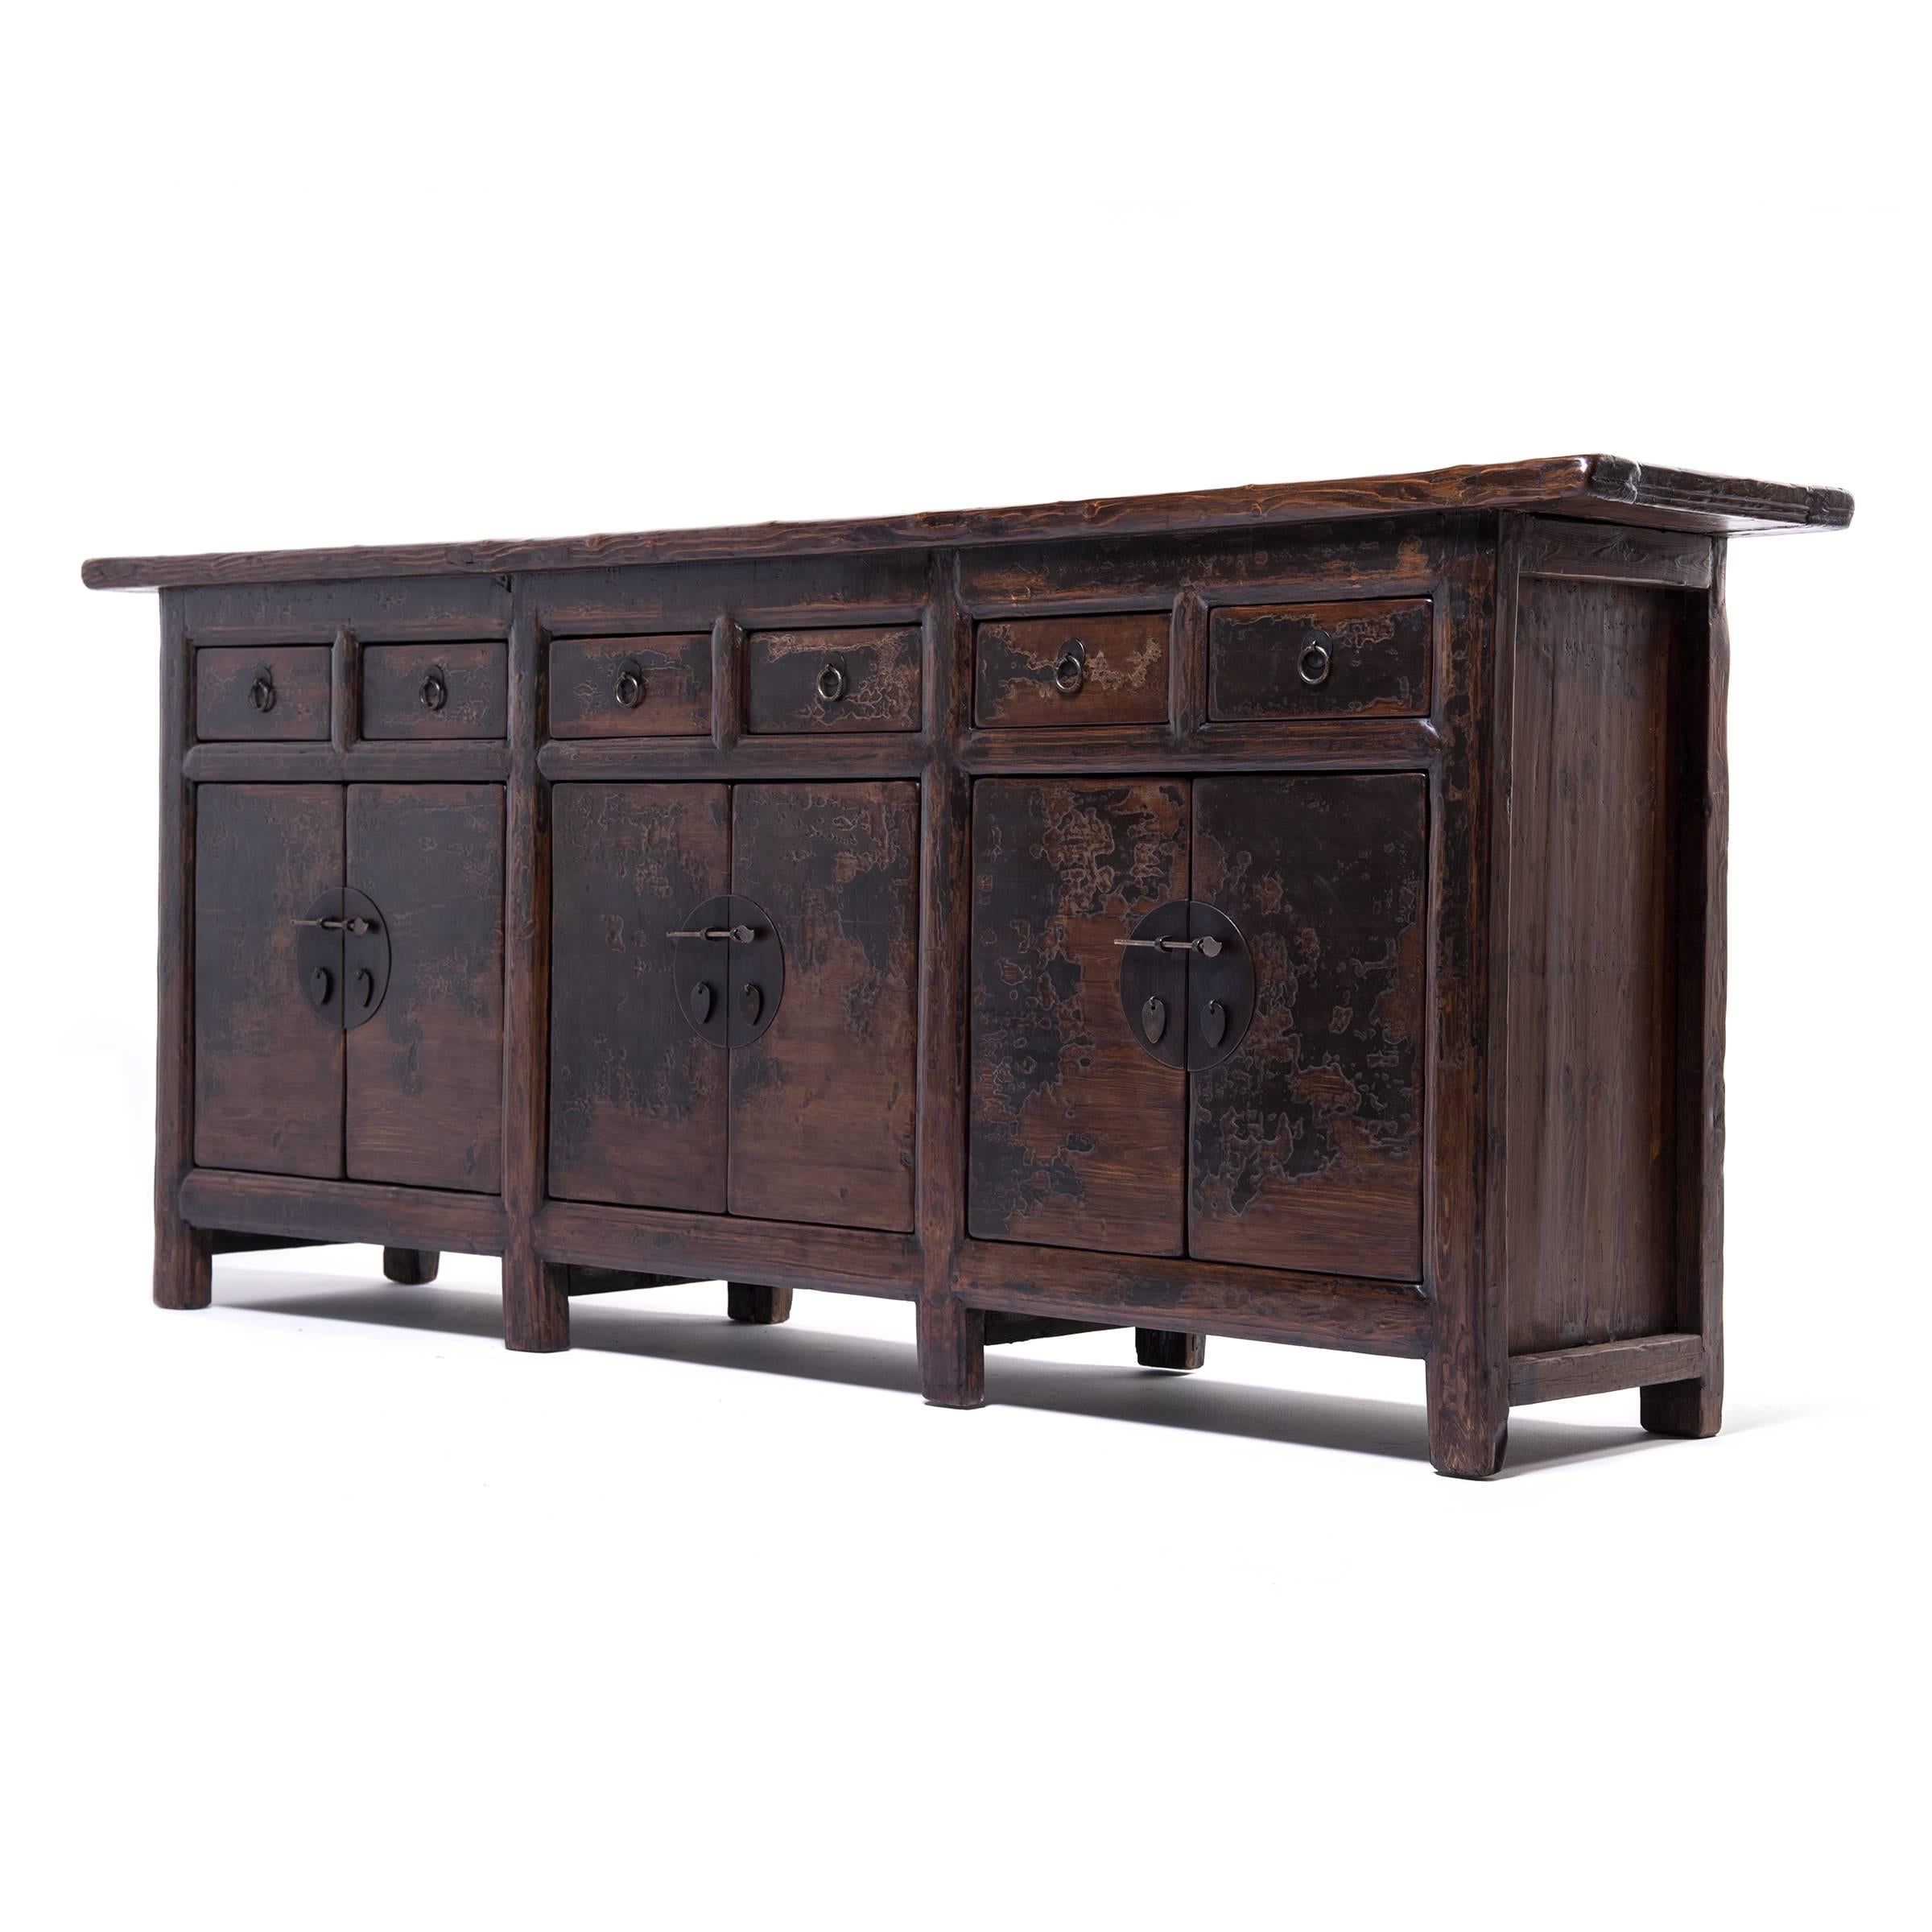 This monumental coffer was made in China’s Shanxi province and is emblematic of 19th century Chinese furniture design with its thoughtful proportions, select timbers, solid brass hardware, and masterful mortise and Tenon joinery. The flush panel